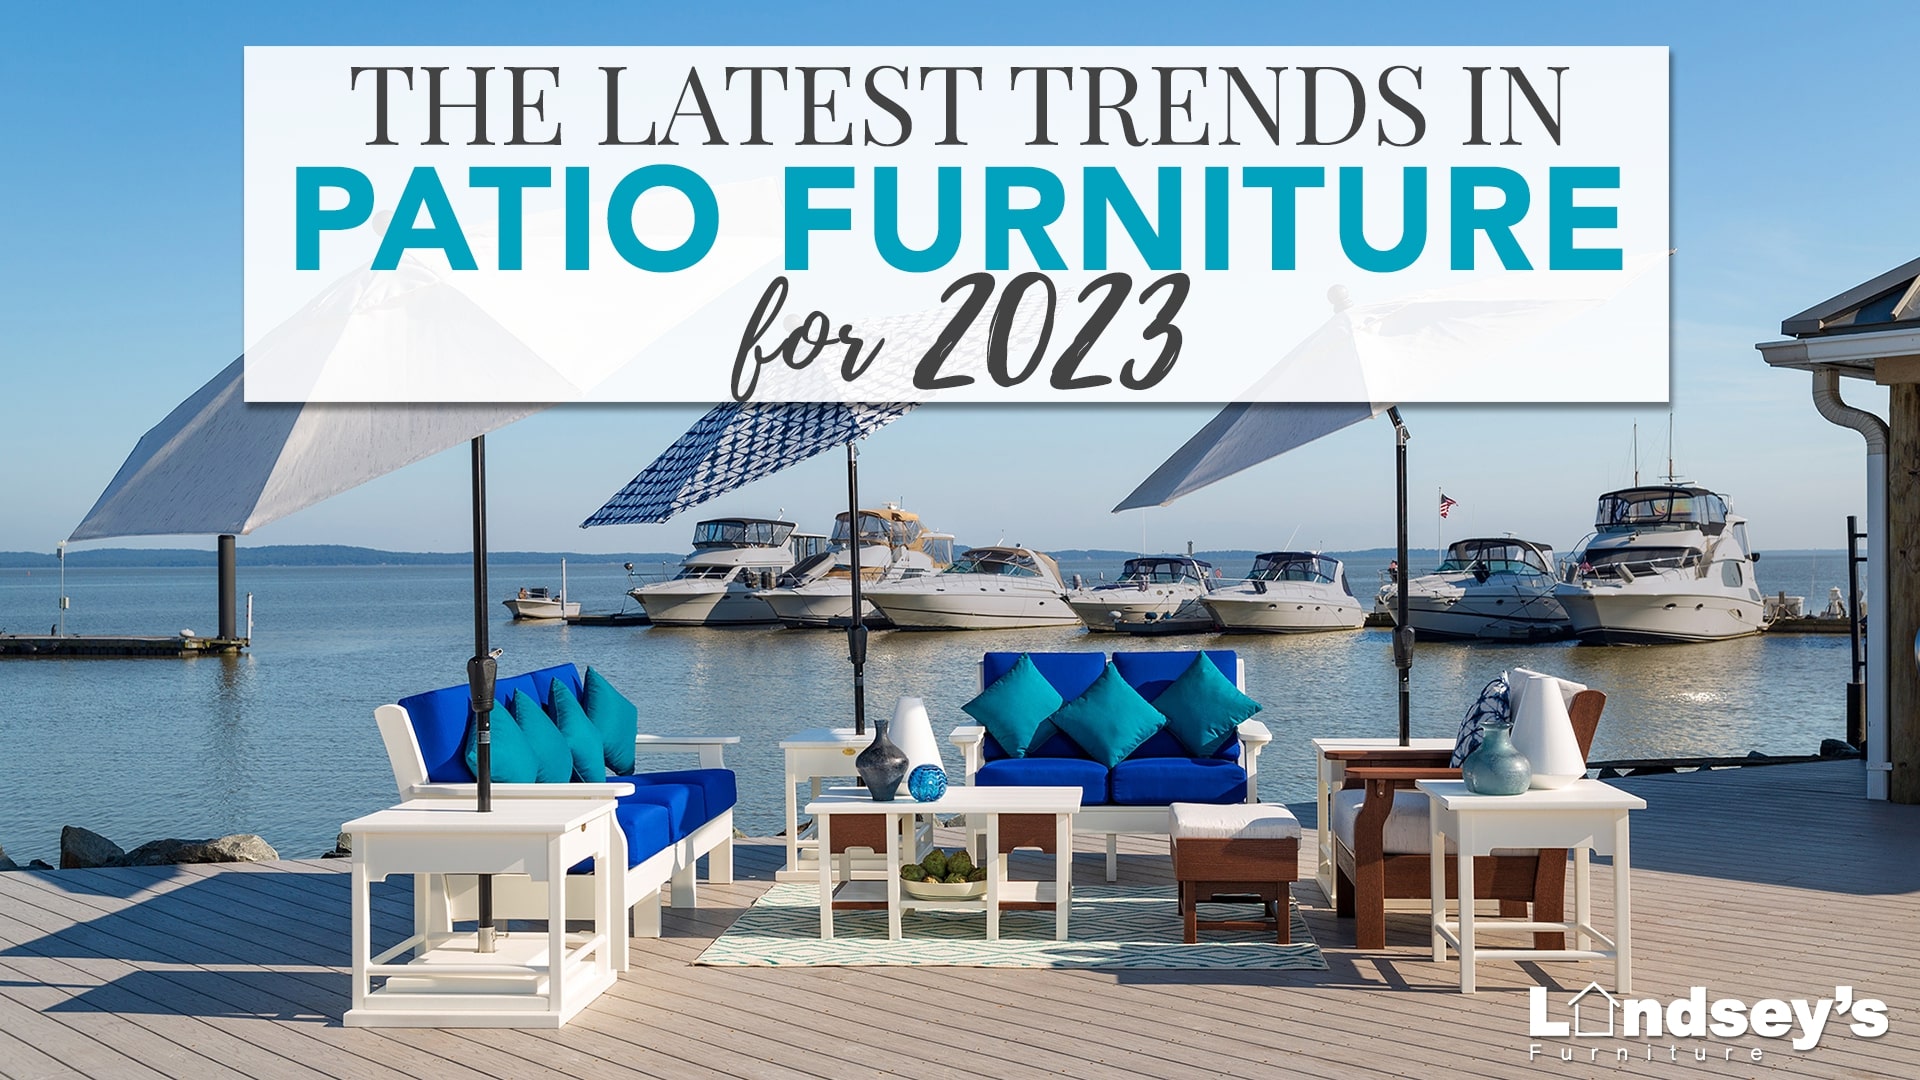 The Latest Trends in Patio Furniture for 2023